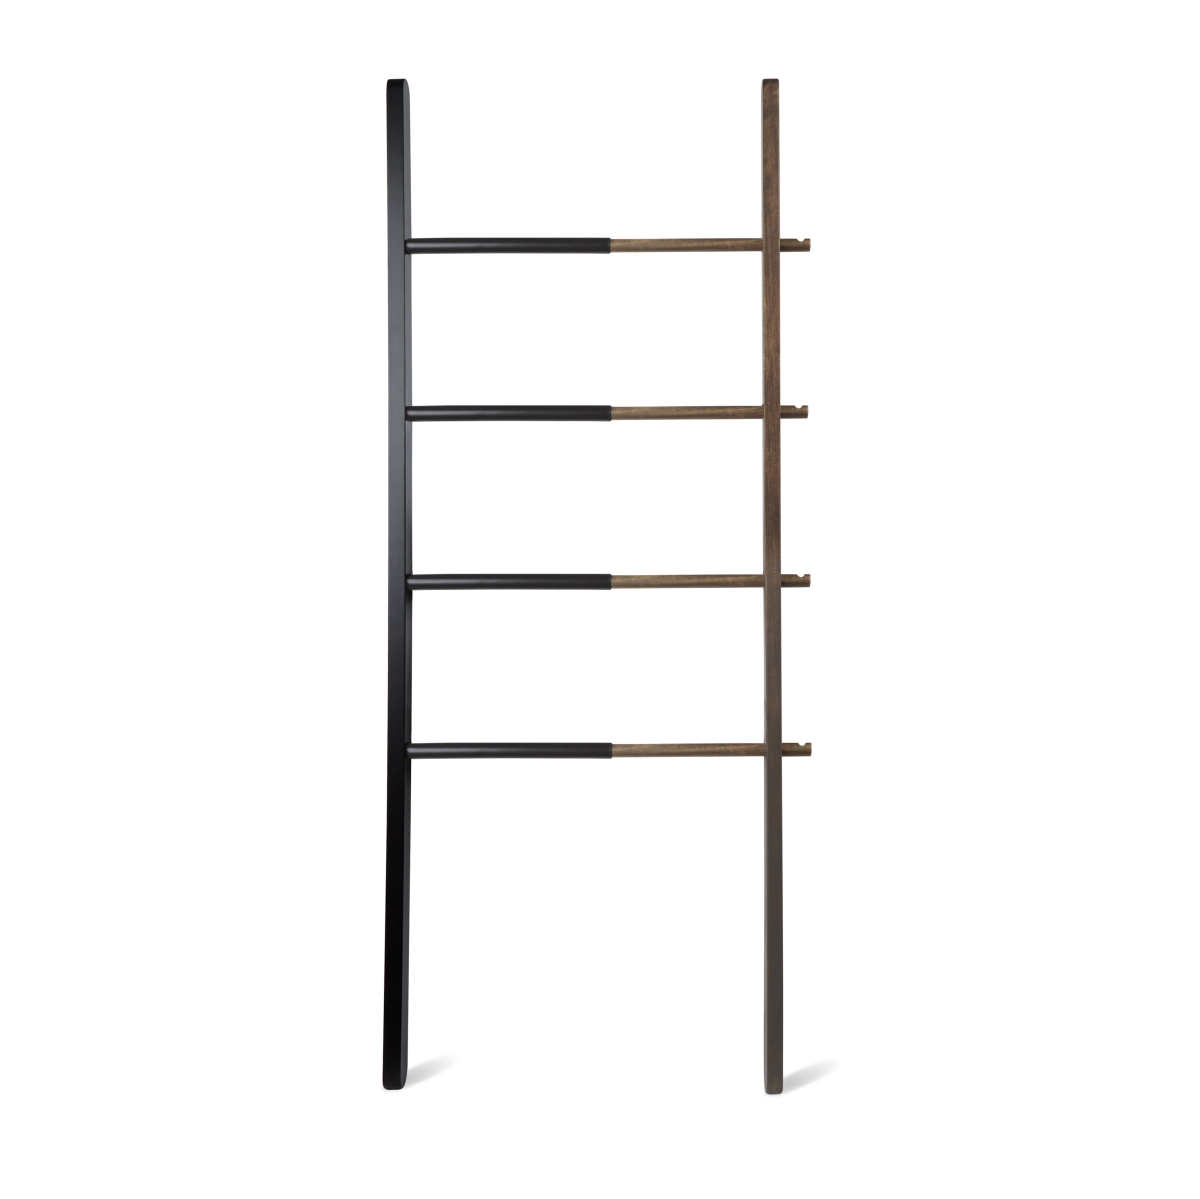 320260-048 Hub Ladder Expands From 16 To 24 In. - Black & Walnut